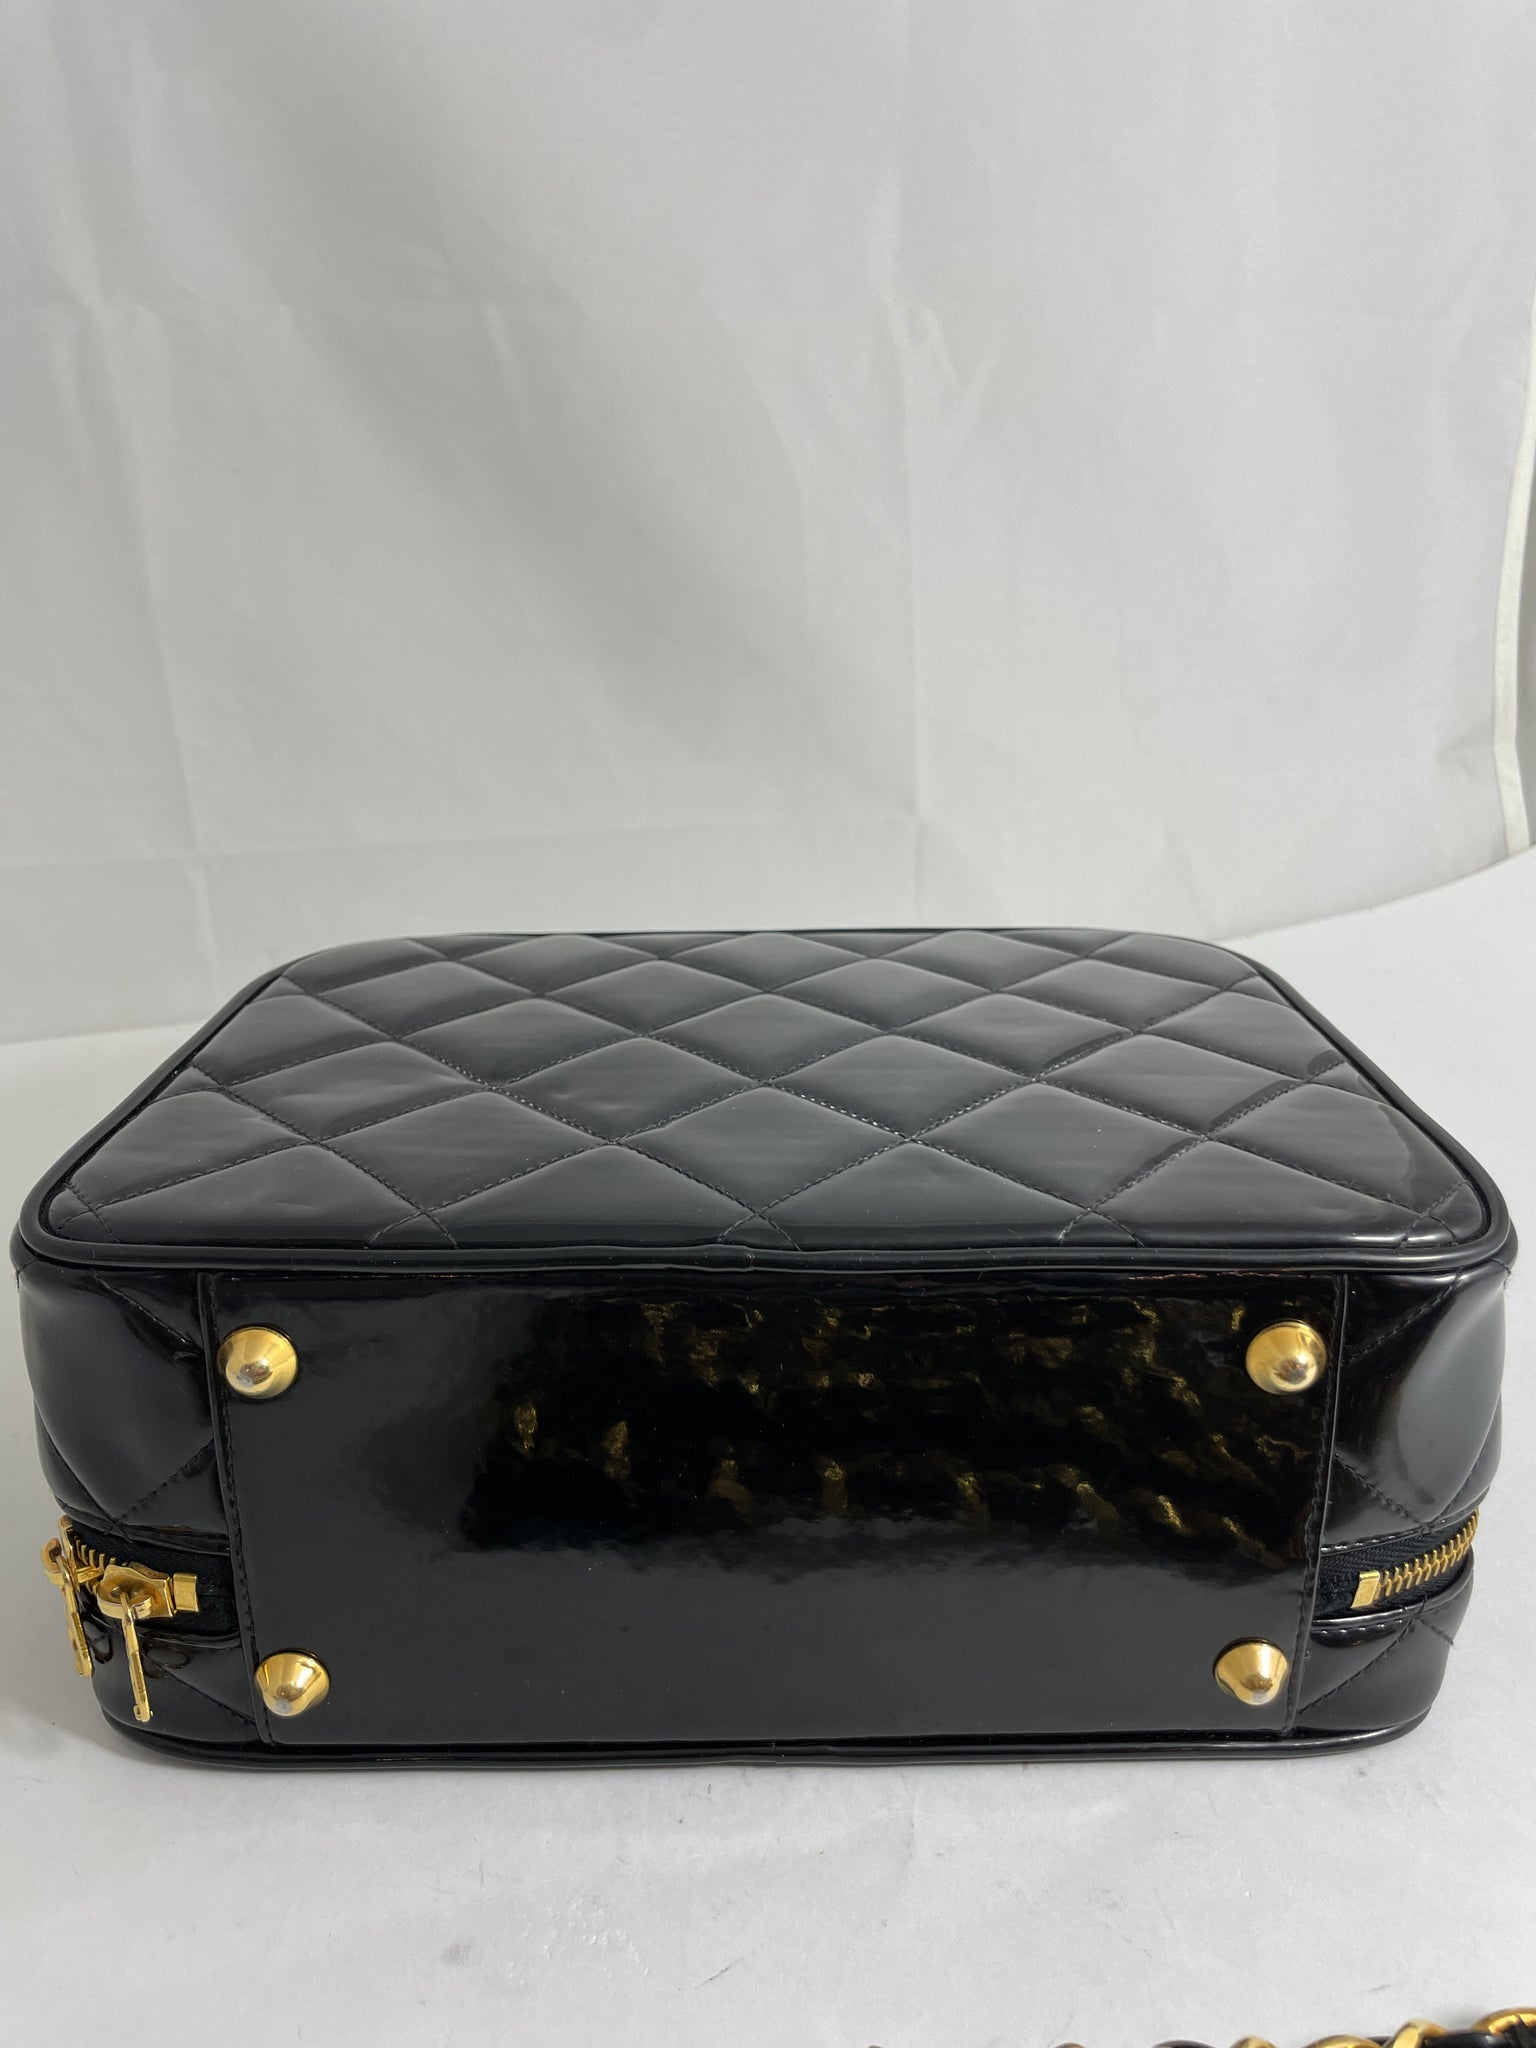 CHANEL, Bags, Chanel Very Rare Vintage Brown Lunch Box